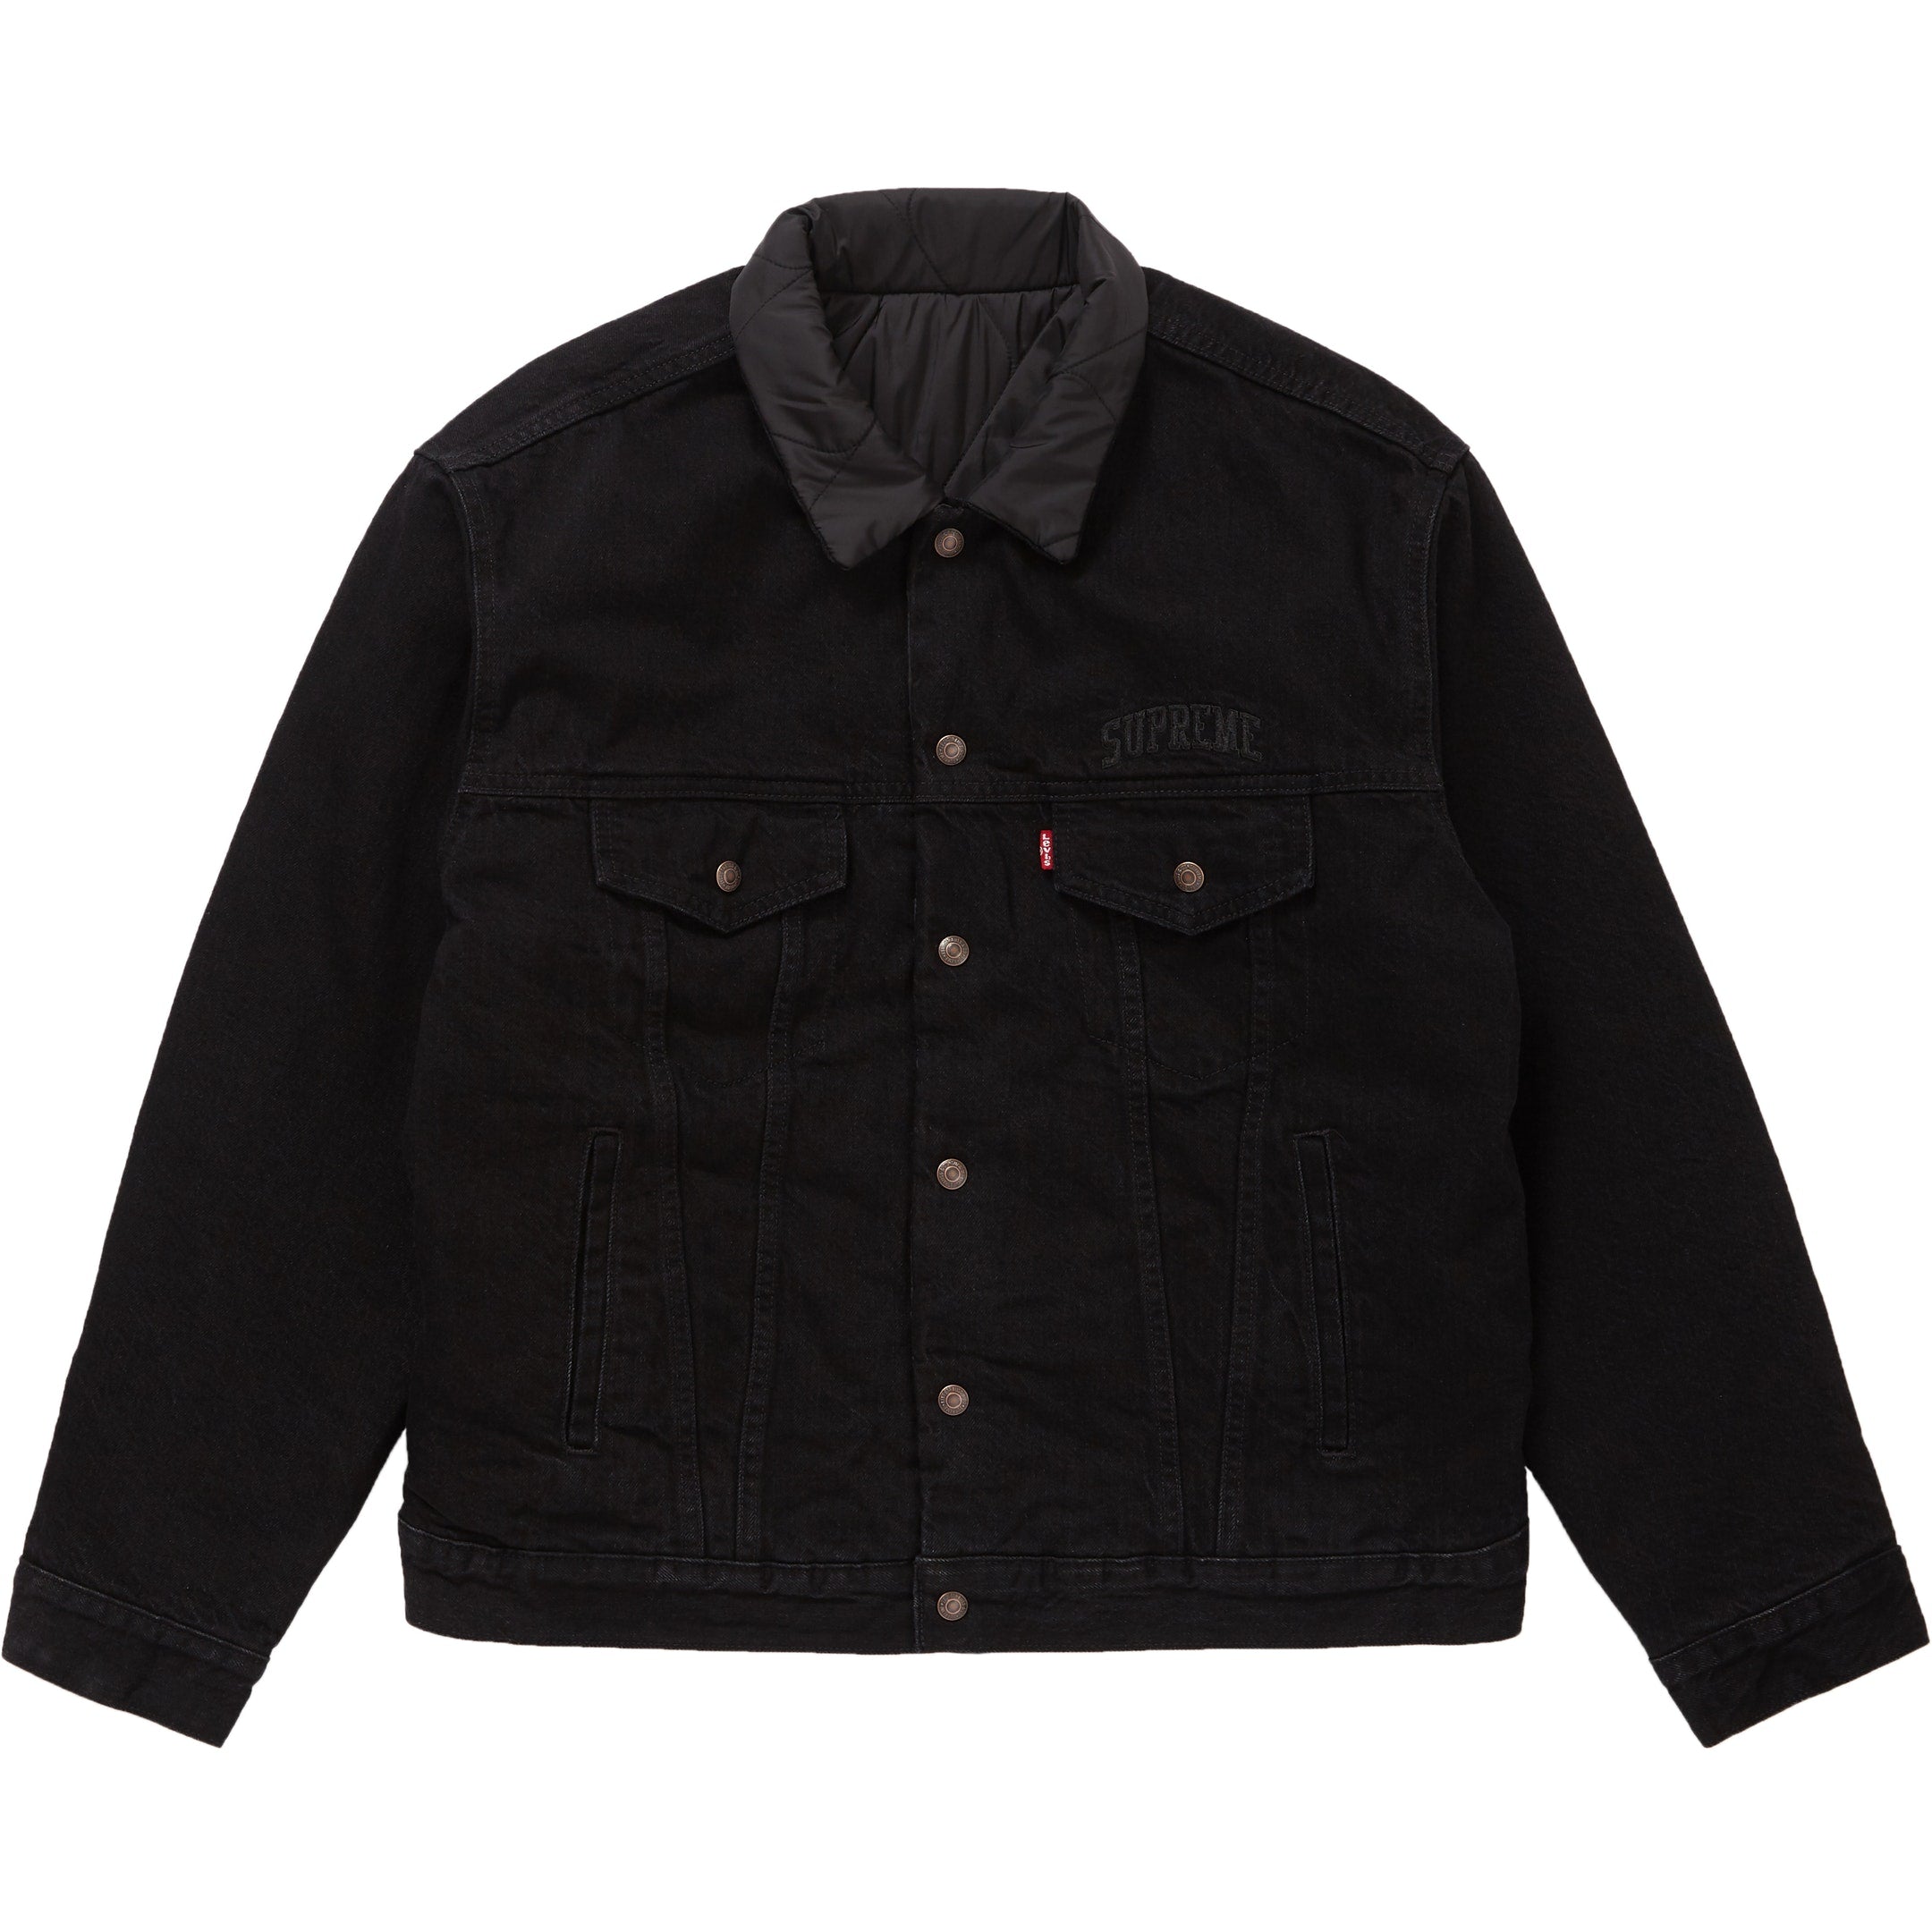 Levi’s Quilted Reversible Trucker Jacketメンズ